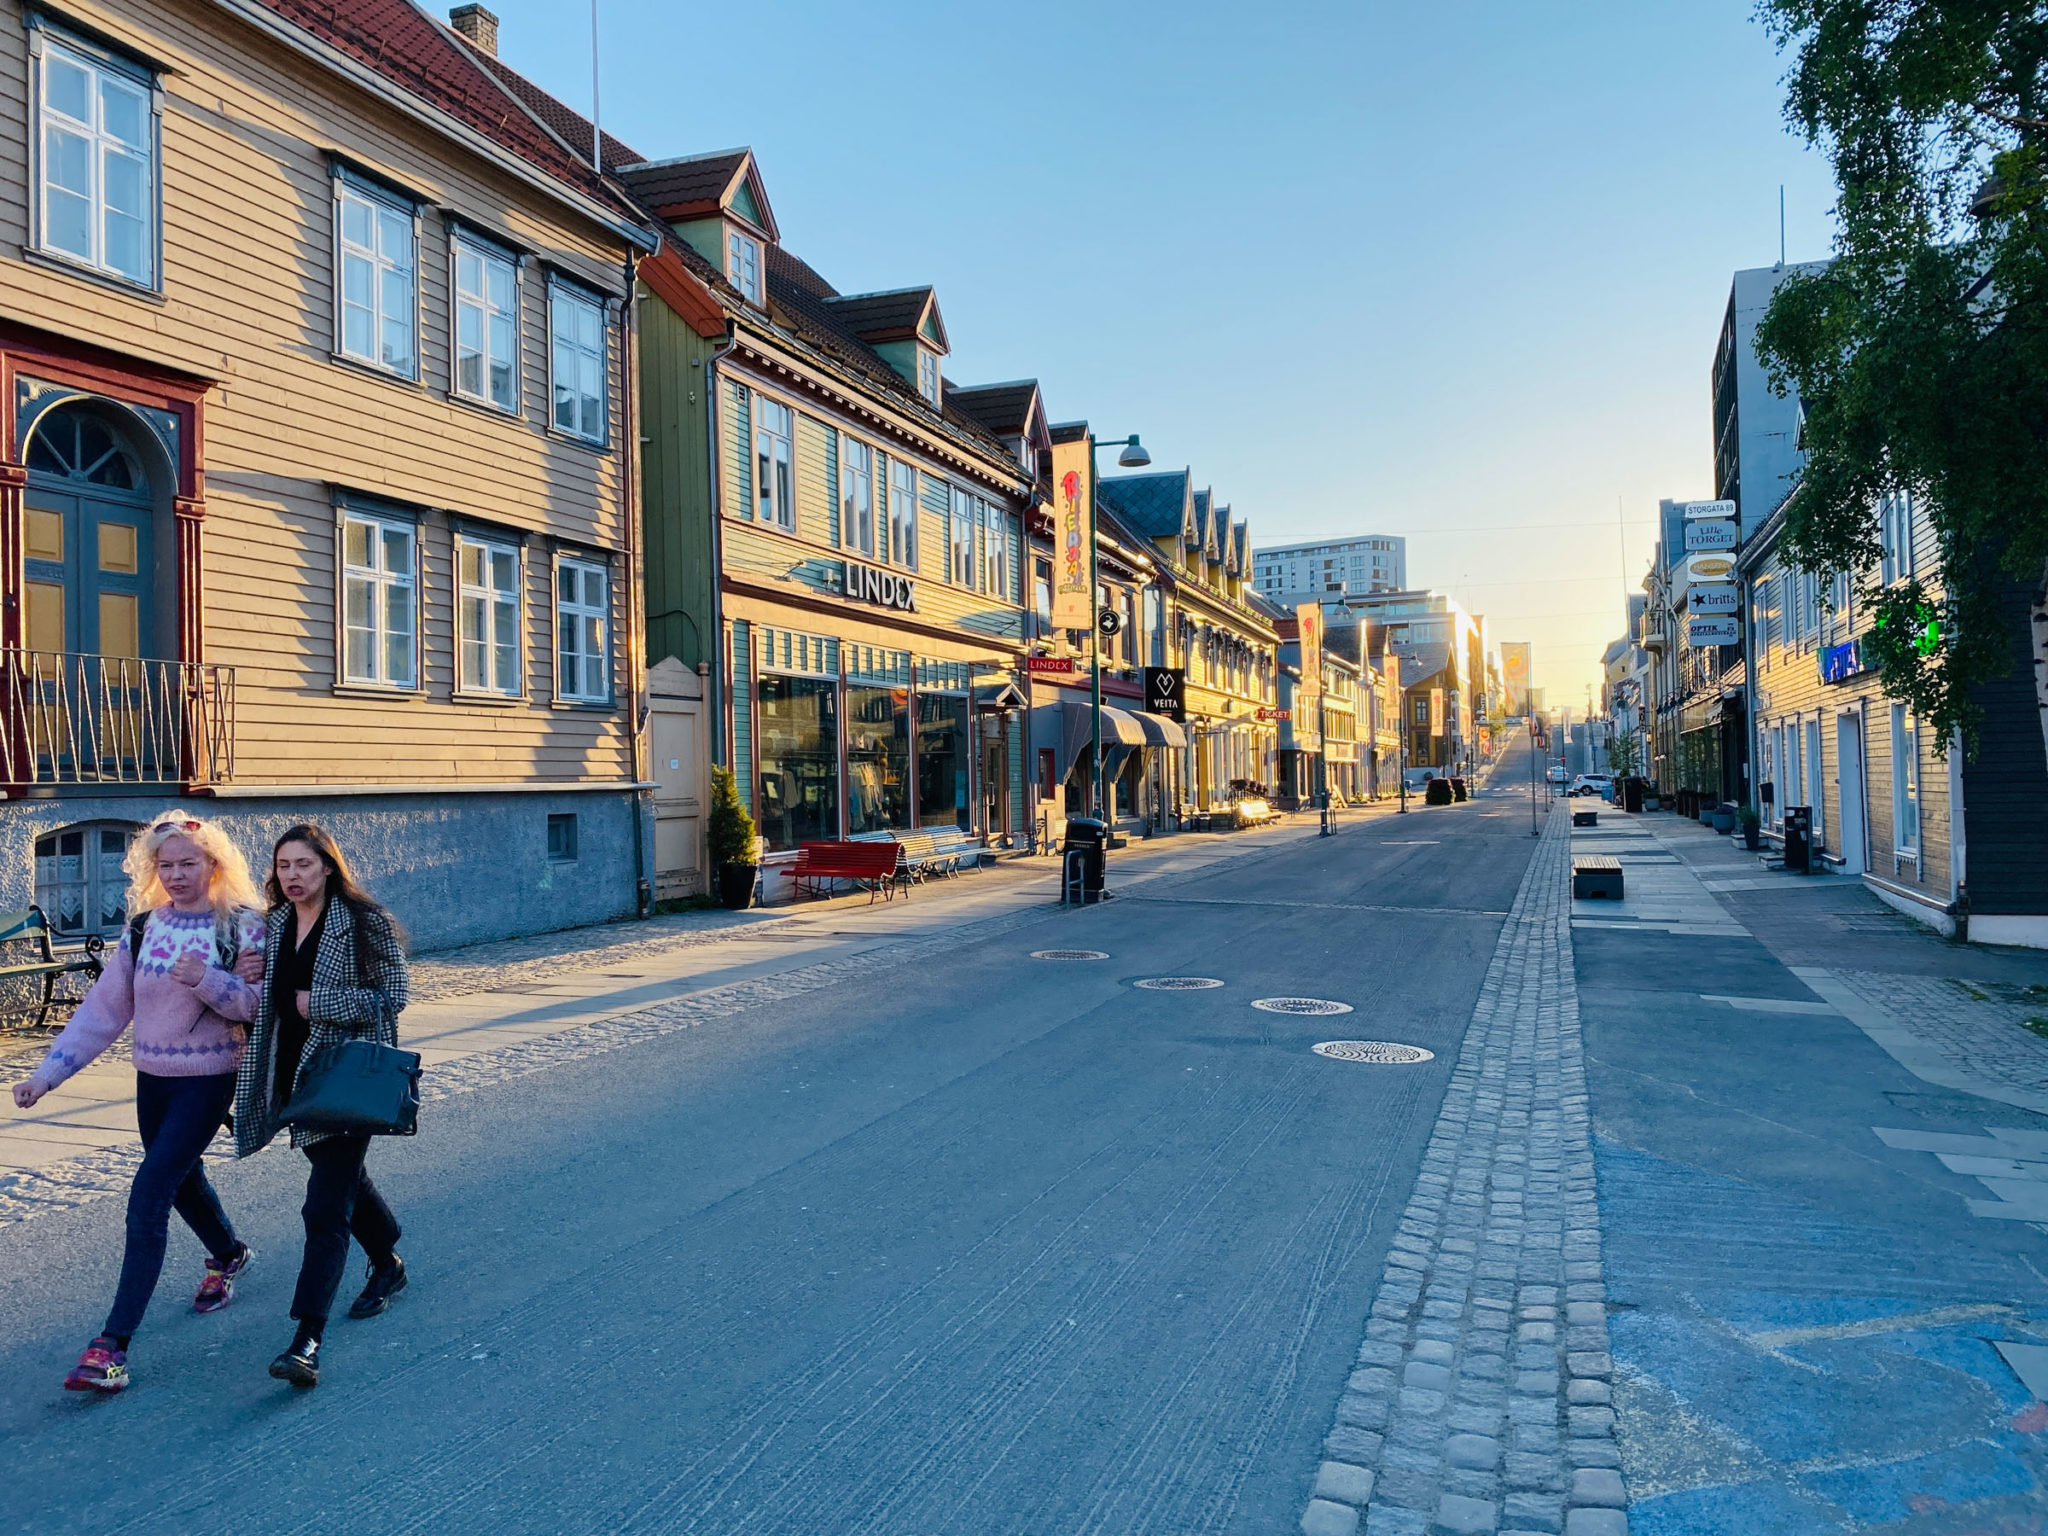 At 2-3 in the morning, the sun enters the main street in June-July © Knut Hansvold